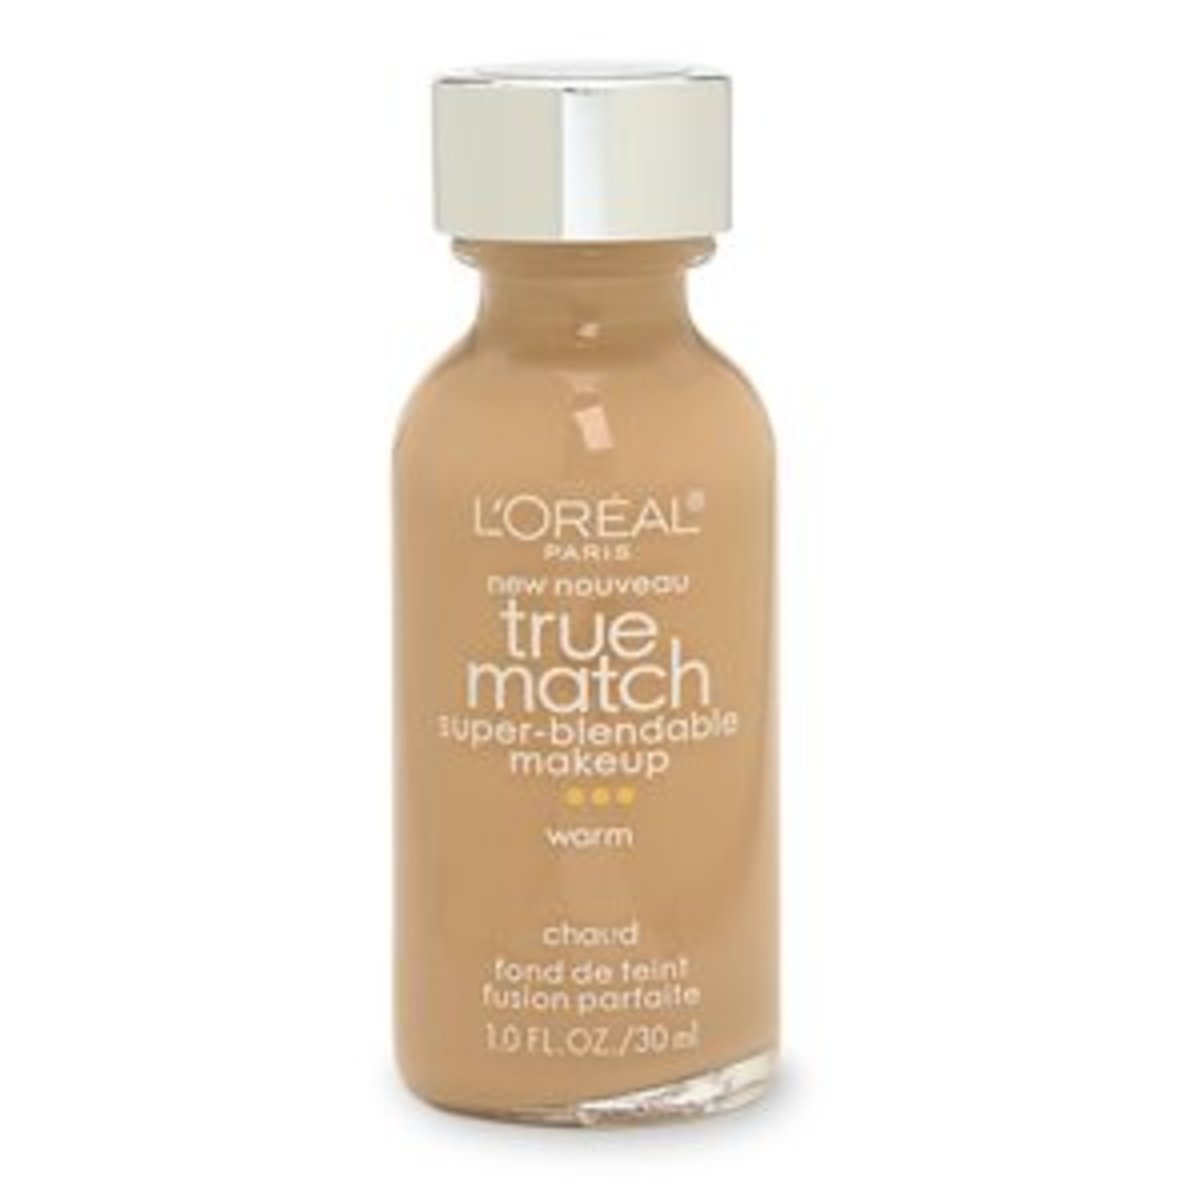 My Review of L'Oreal True Match Liquid Foundation